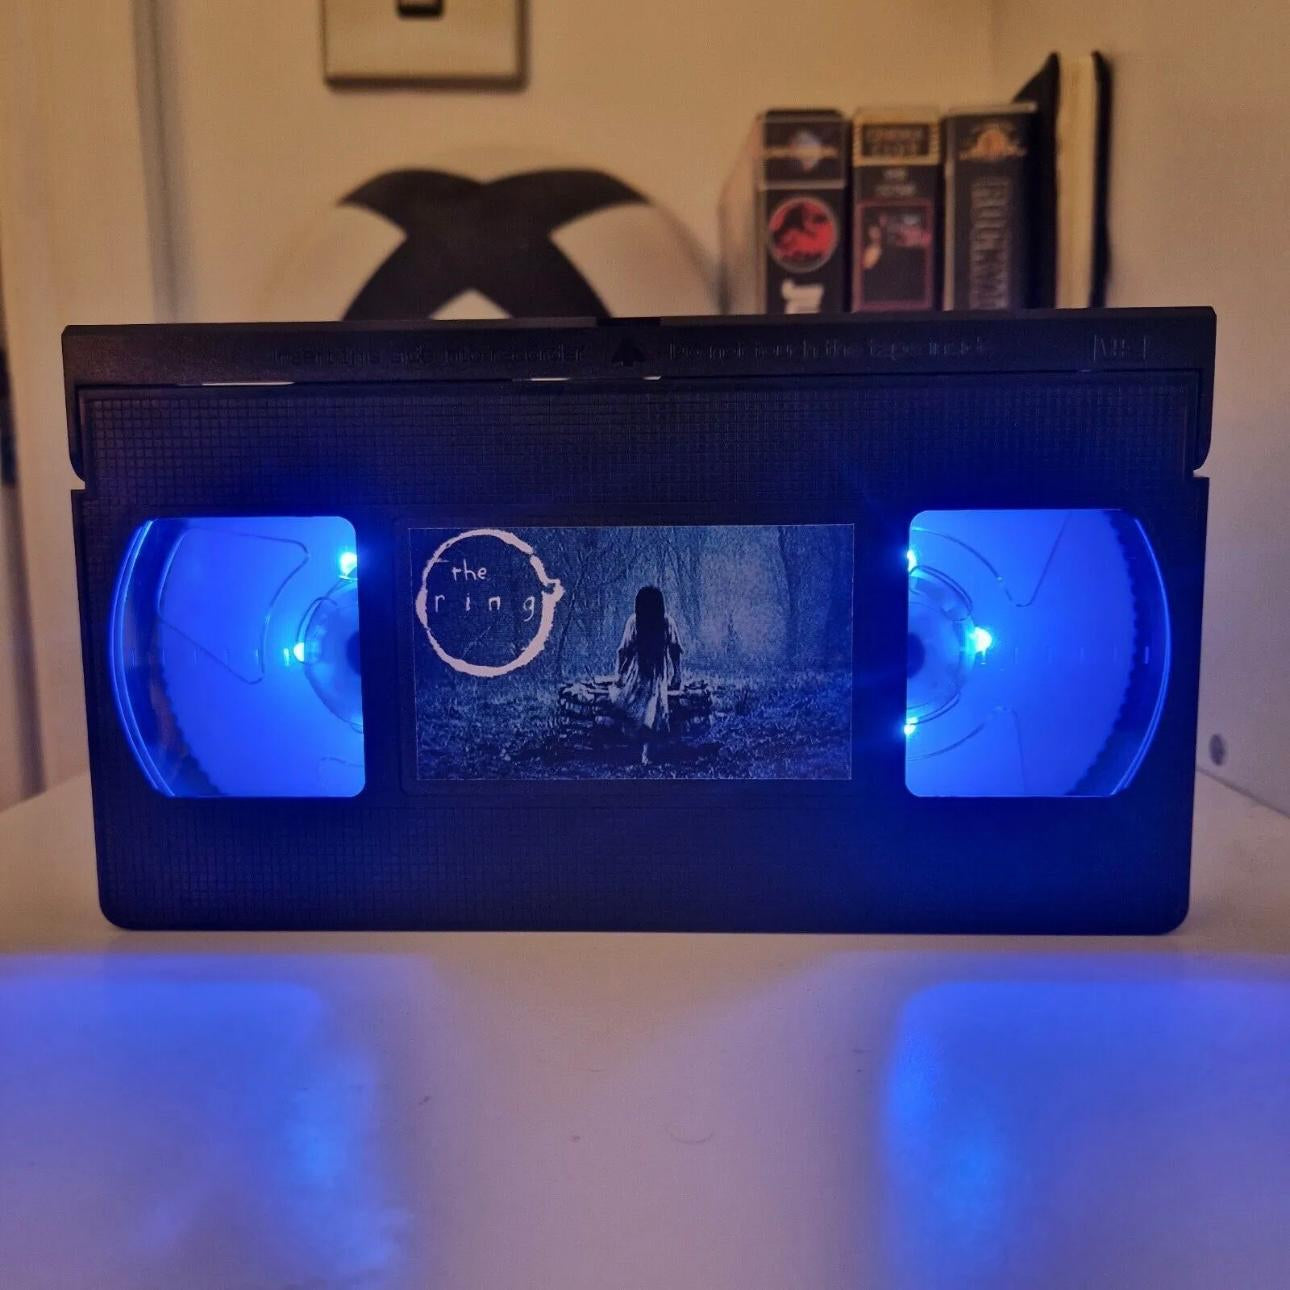 The Ring (2002) VHS LED Lamp